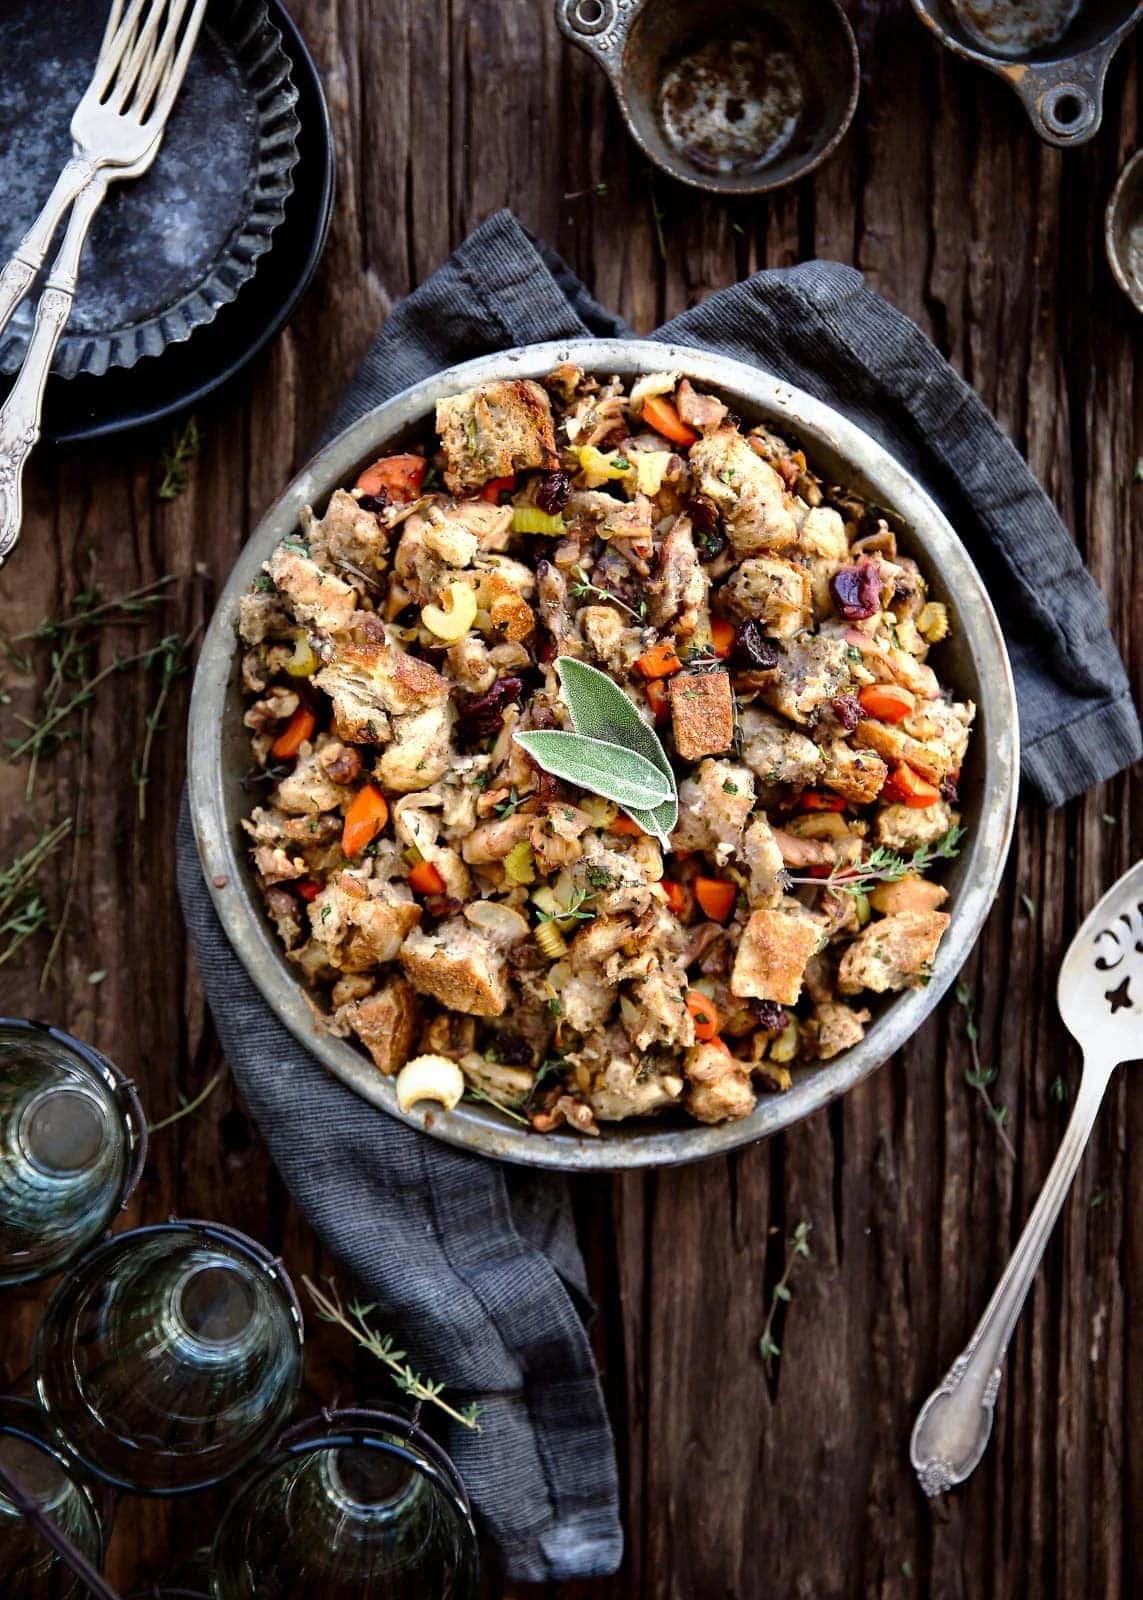 The best part of Thanksgiving is stuffing. So why not make the ultimate Thanksgiving stuffing with sourdough, dark meat chicken, dried cherries, walnuts, and loads of herbs?